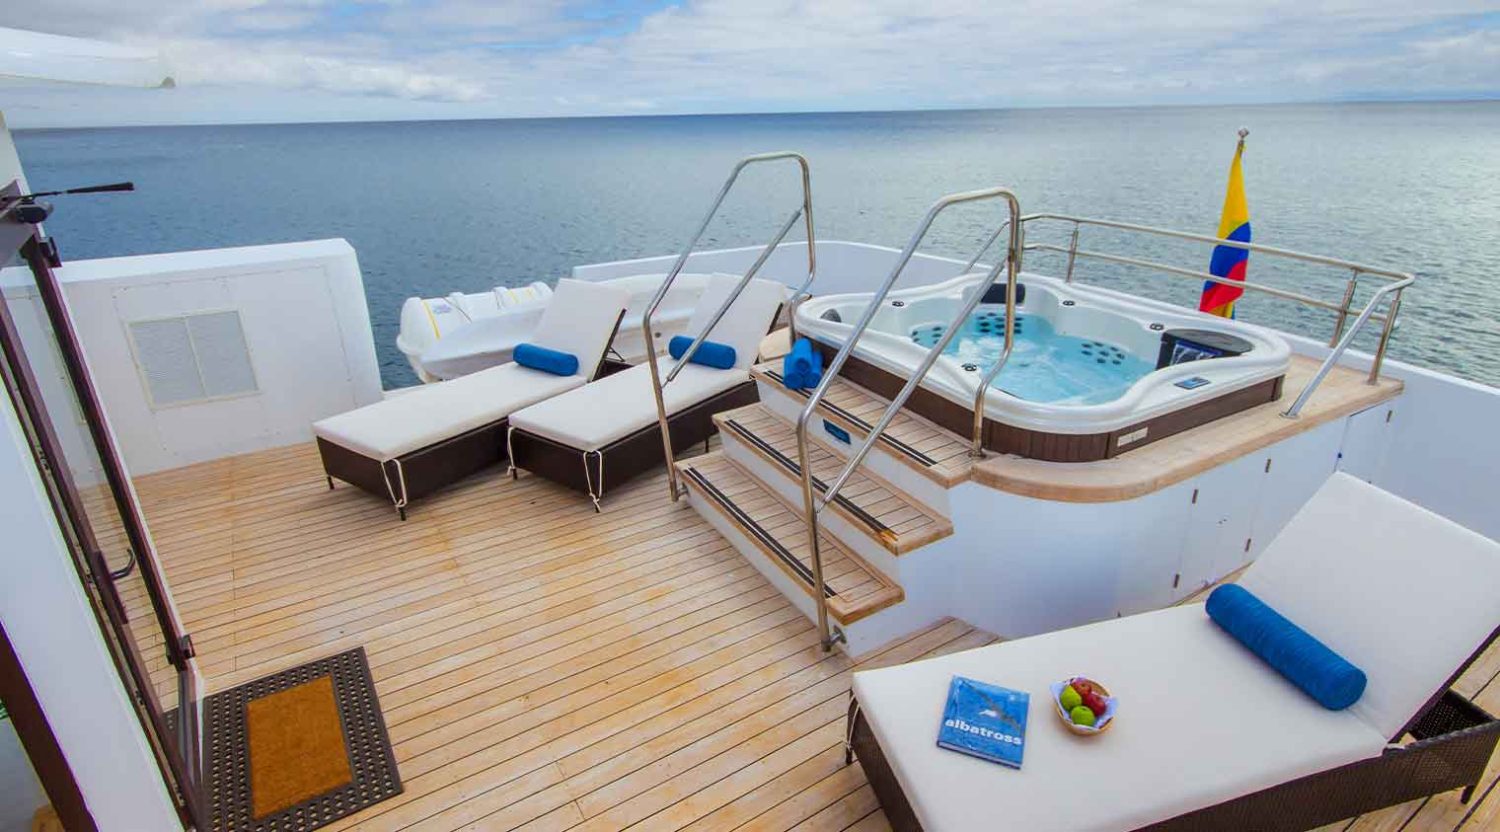 top deck with yacuzzi natural paradise yacht of galapagos islands tours